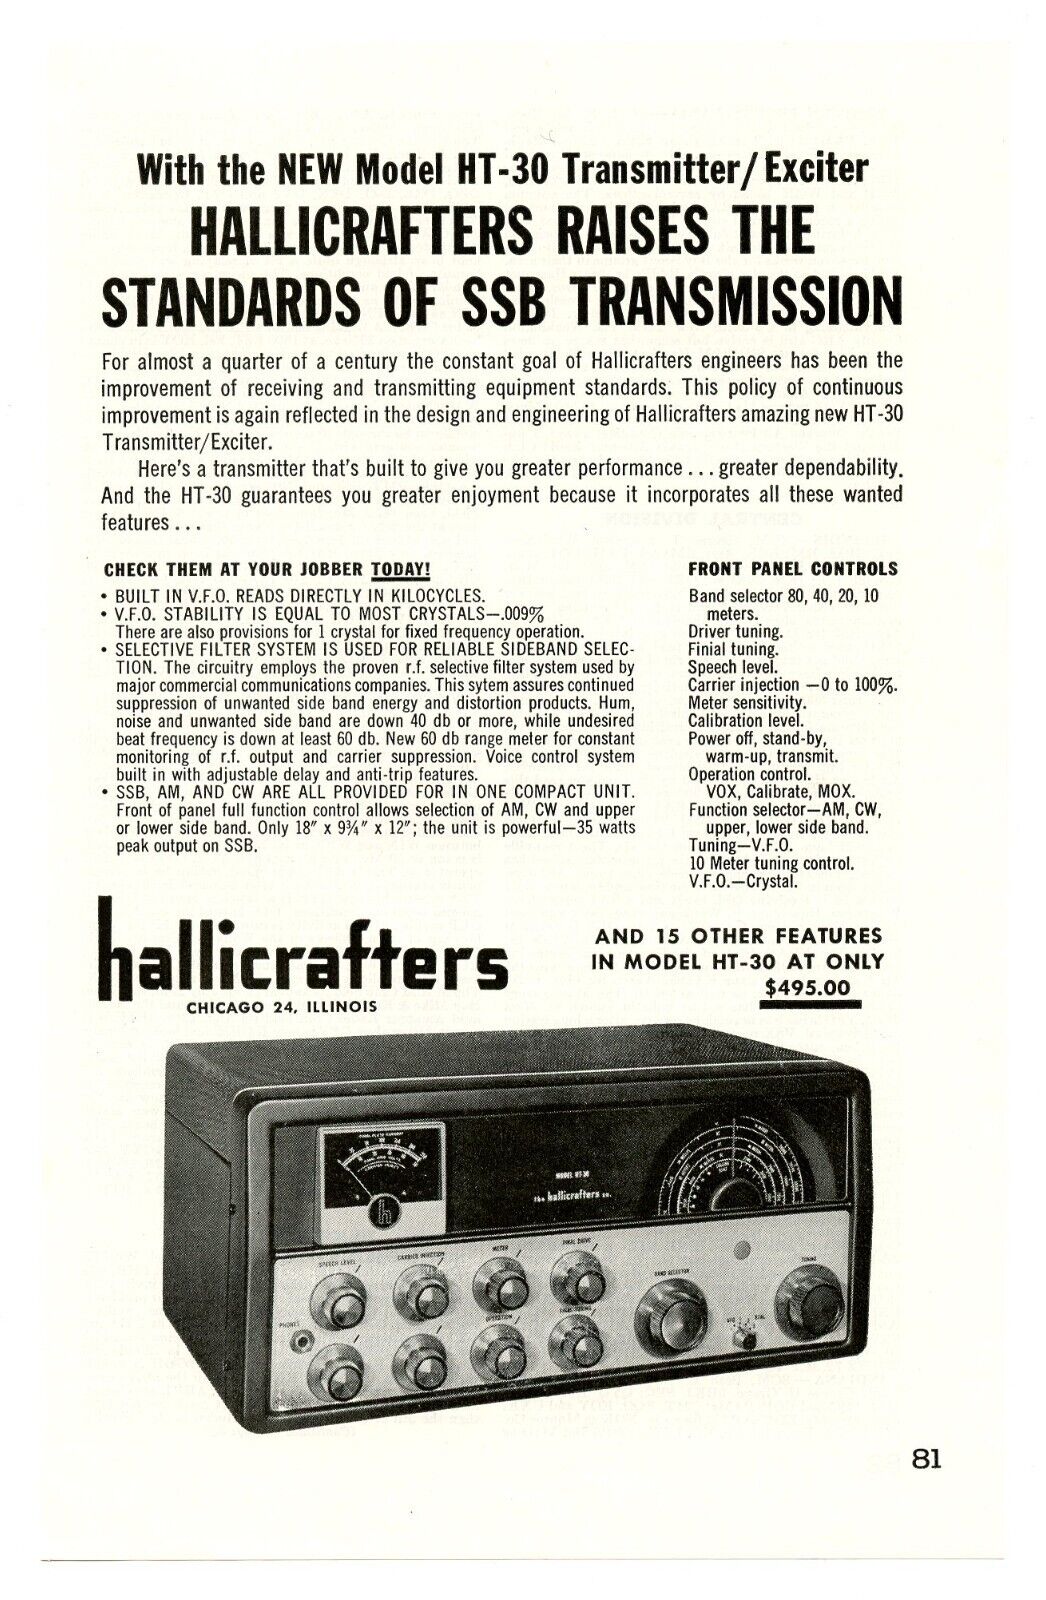 QST Ham Radio Mag. Ad HALLICRAFTERS NEW HT-30 Transmitter/Exciter (10/56)